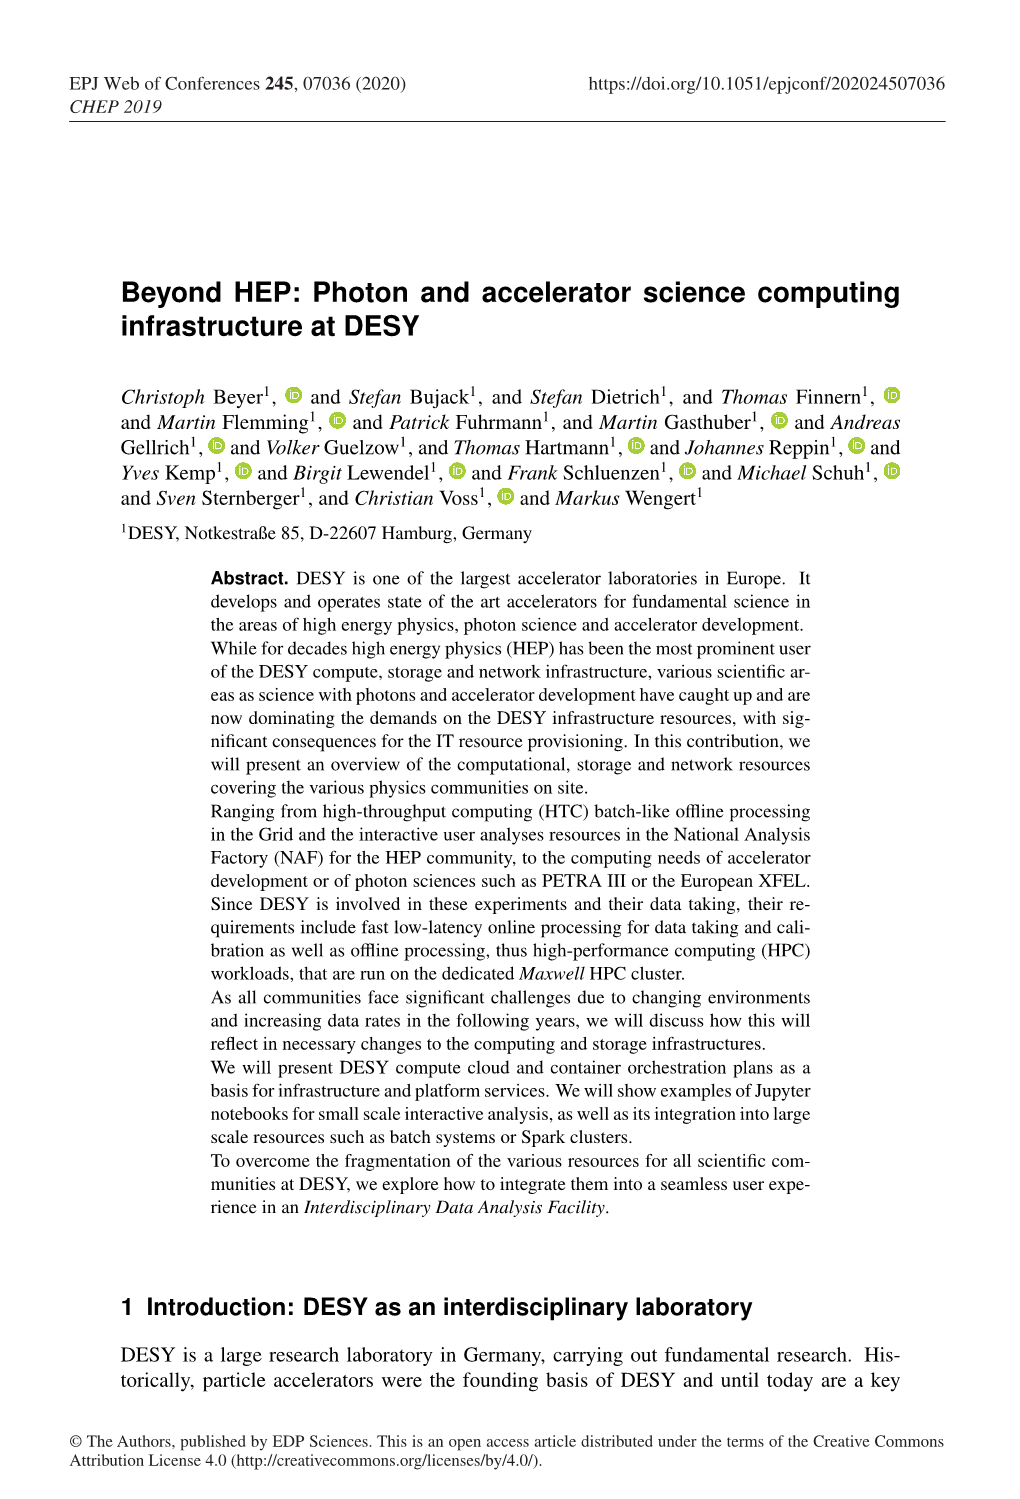 Photon and Accelerator Science Computing Infrastructure at DESY